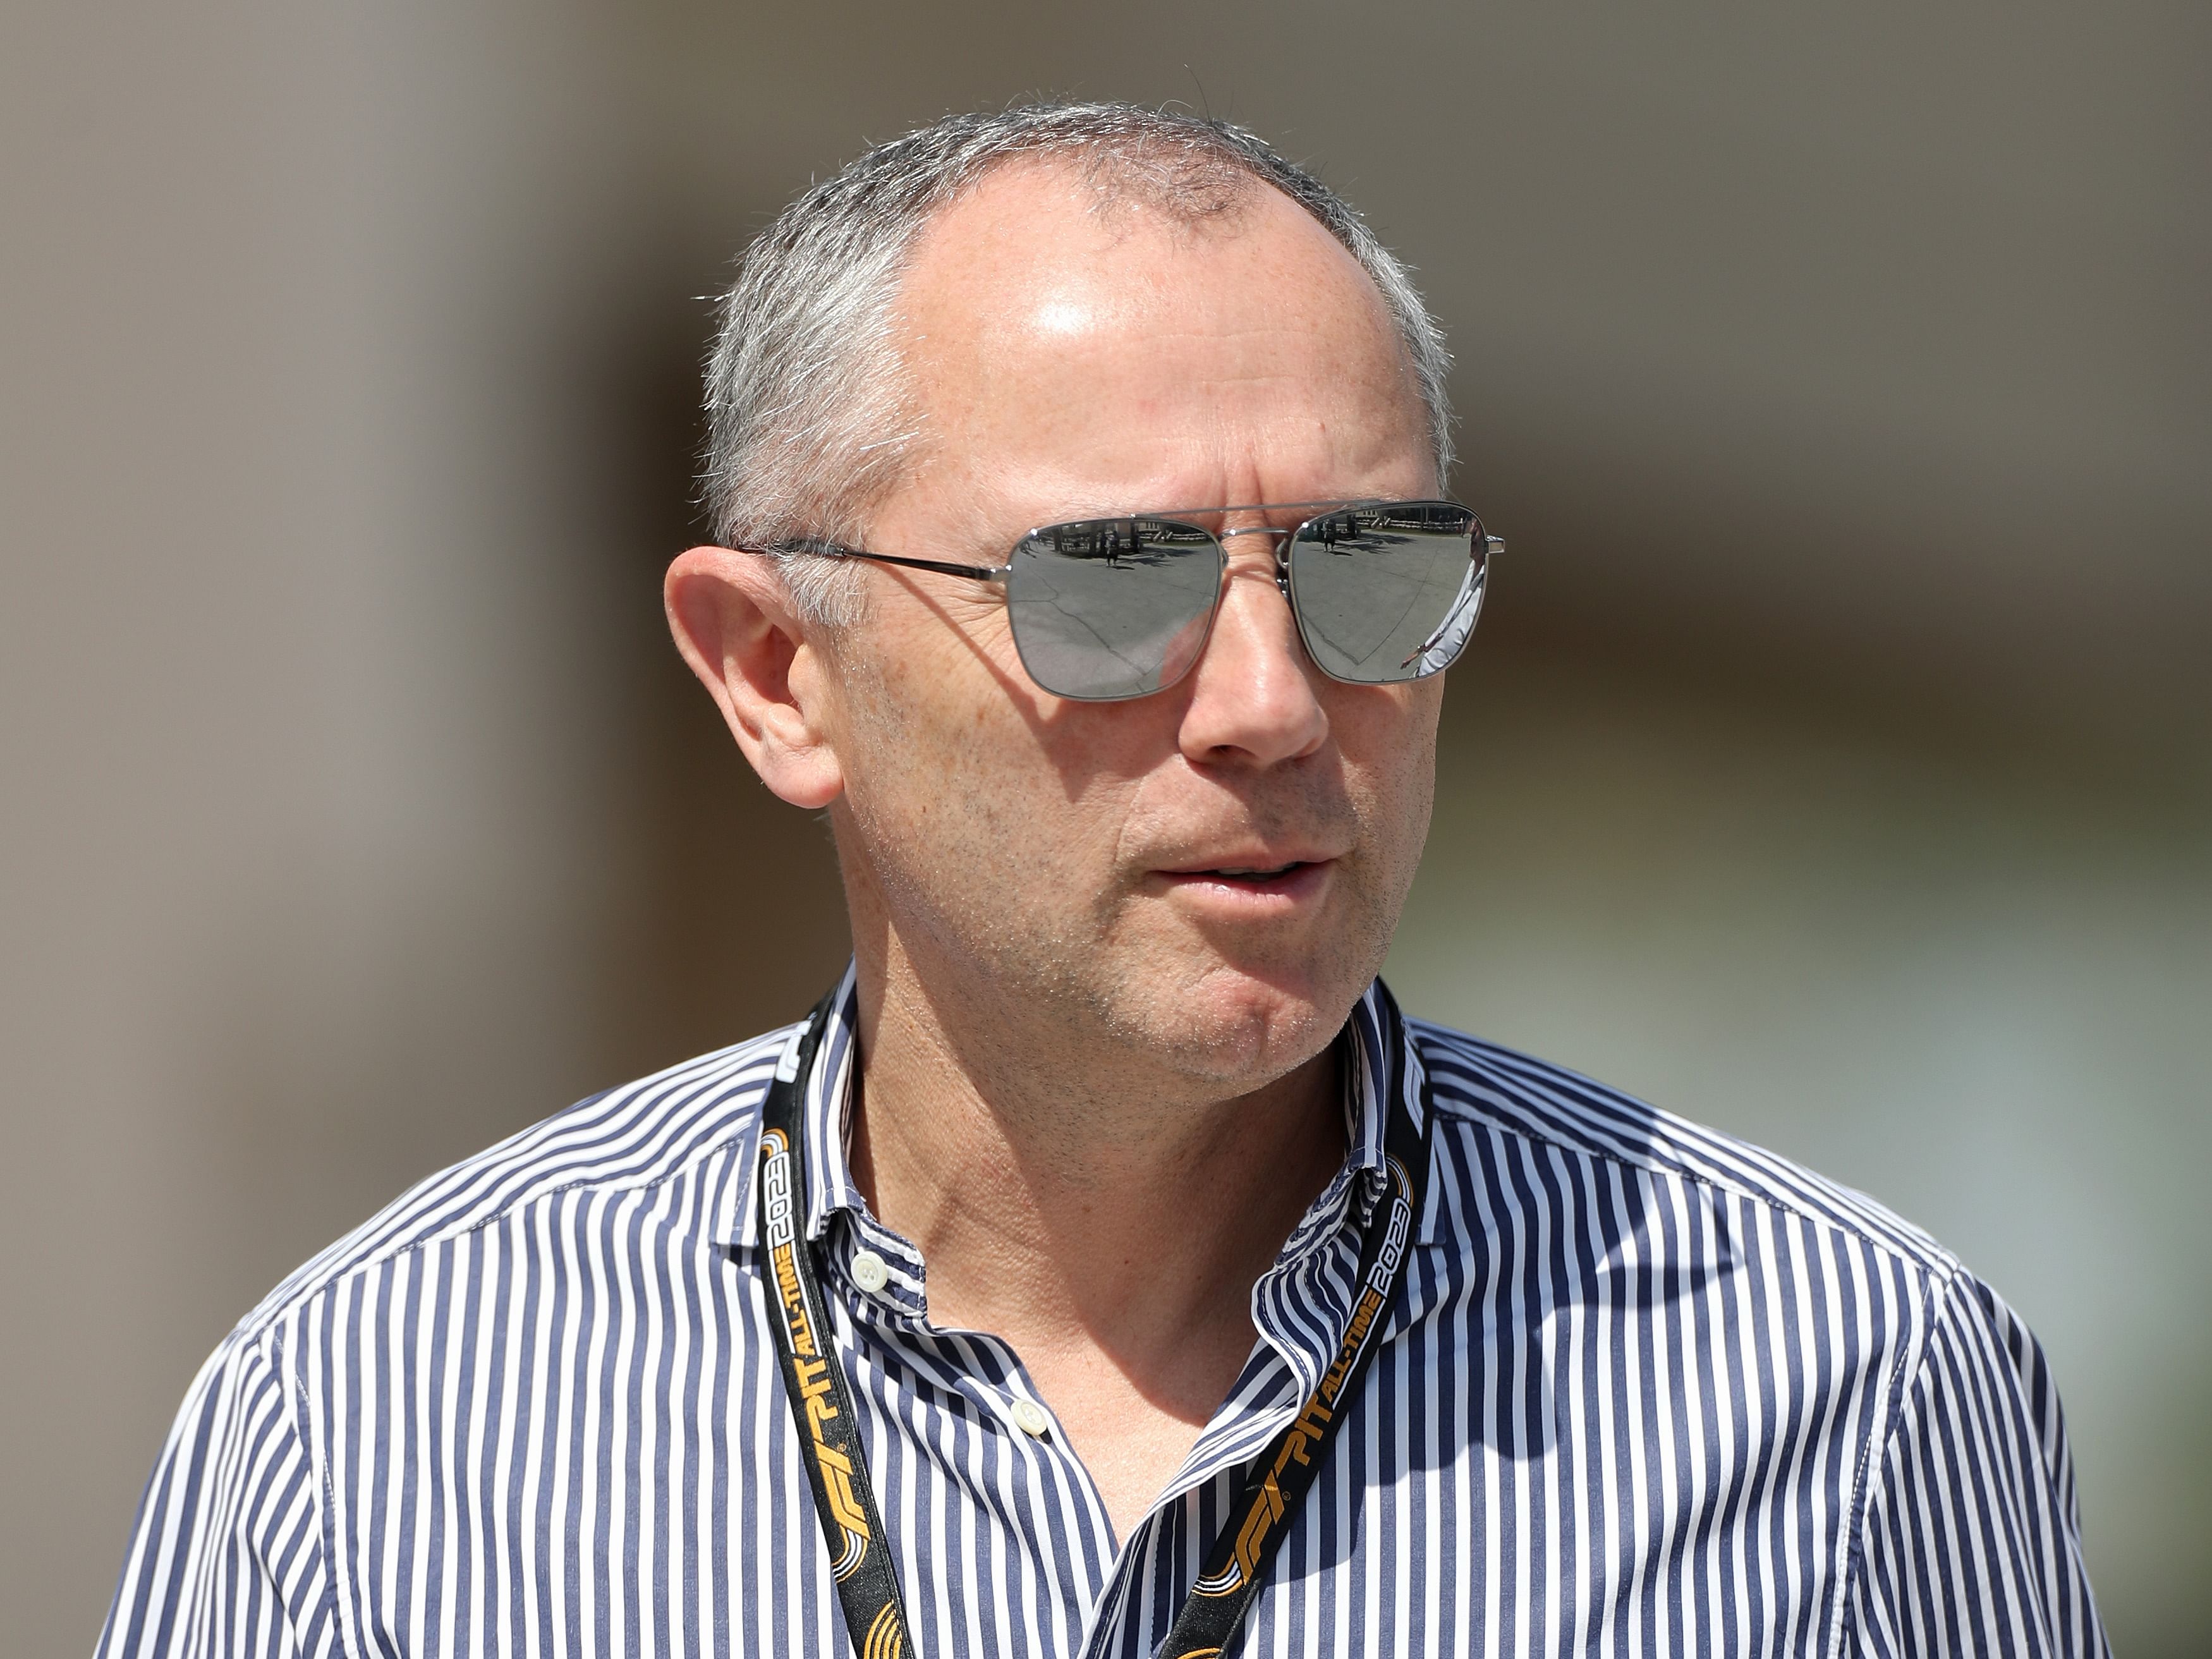 Stefano Domenicali walks in the paddock prior to practice ahead of the 2023 F1 Bahrain Grand Prix. (Photo by Peter Fox/Getty Images)